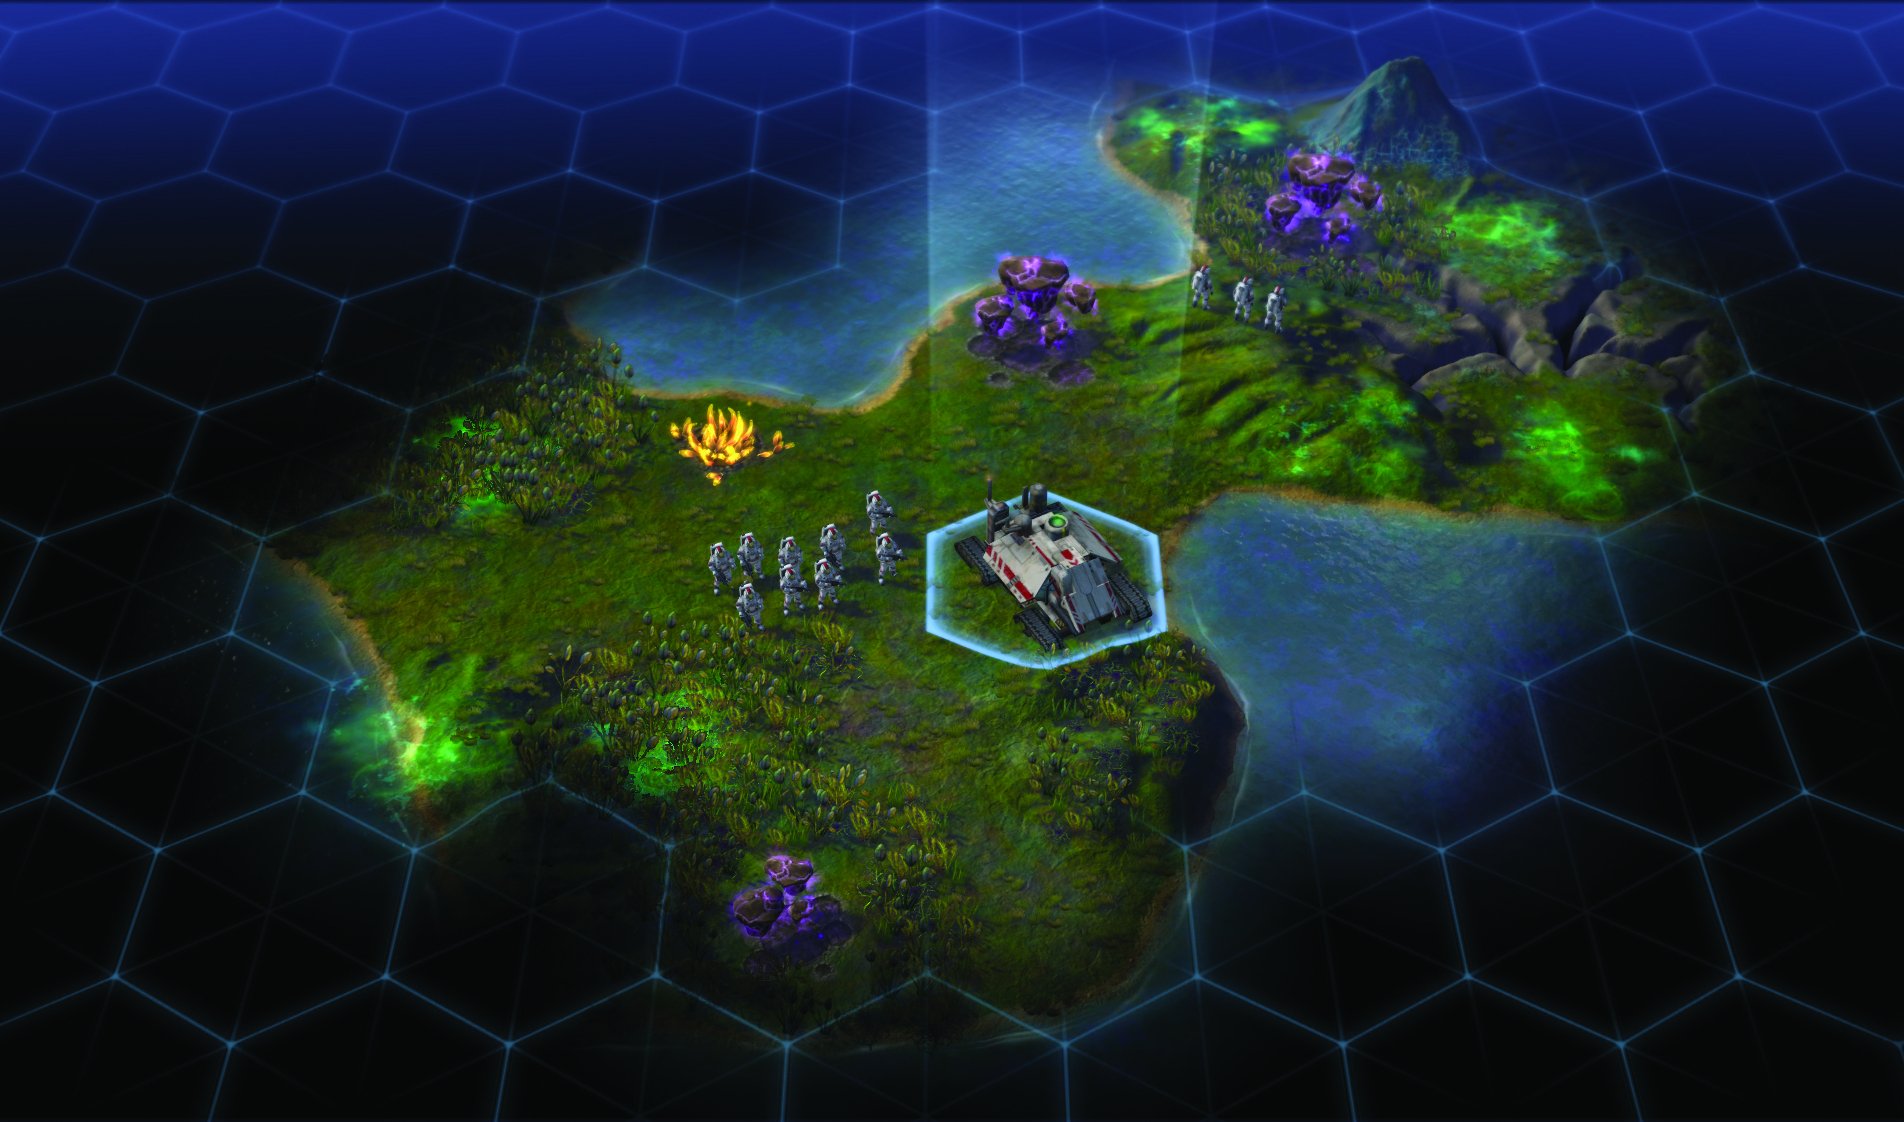 civilization beyond earth wallpapers